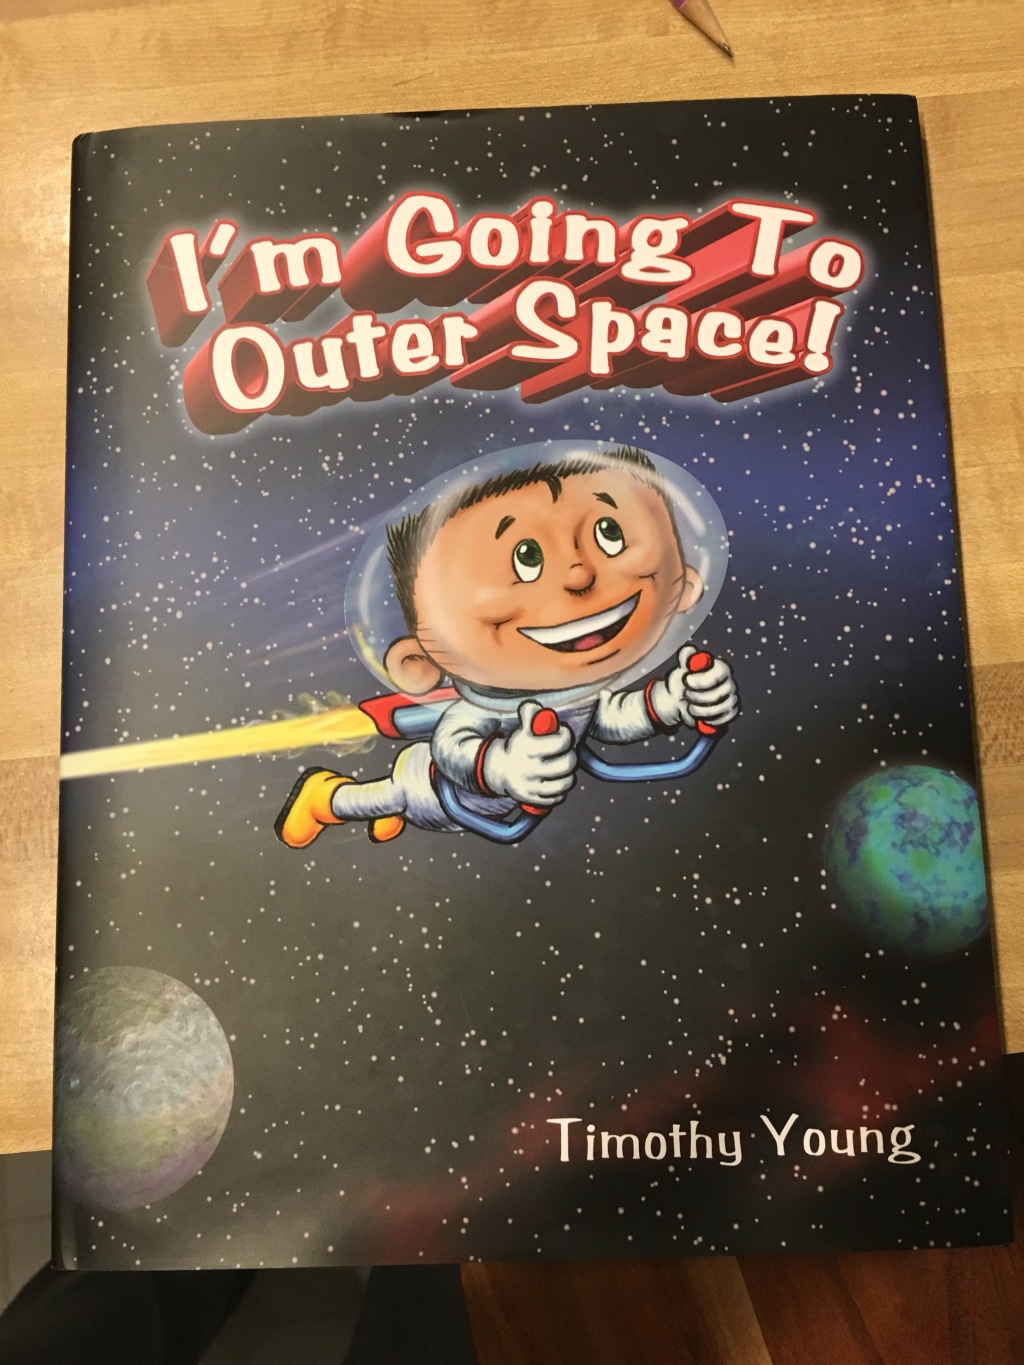 I’m going to Outer Space